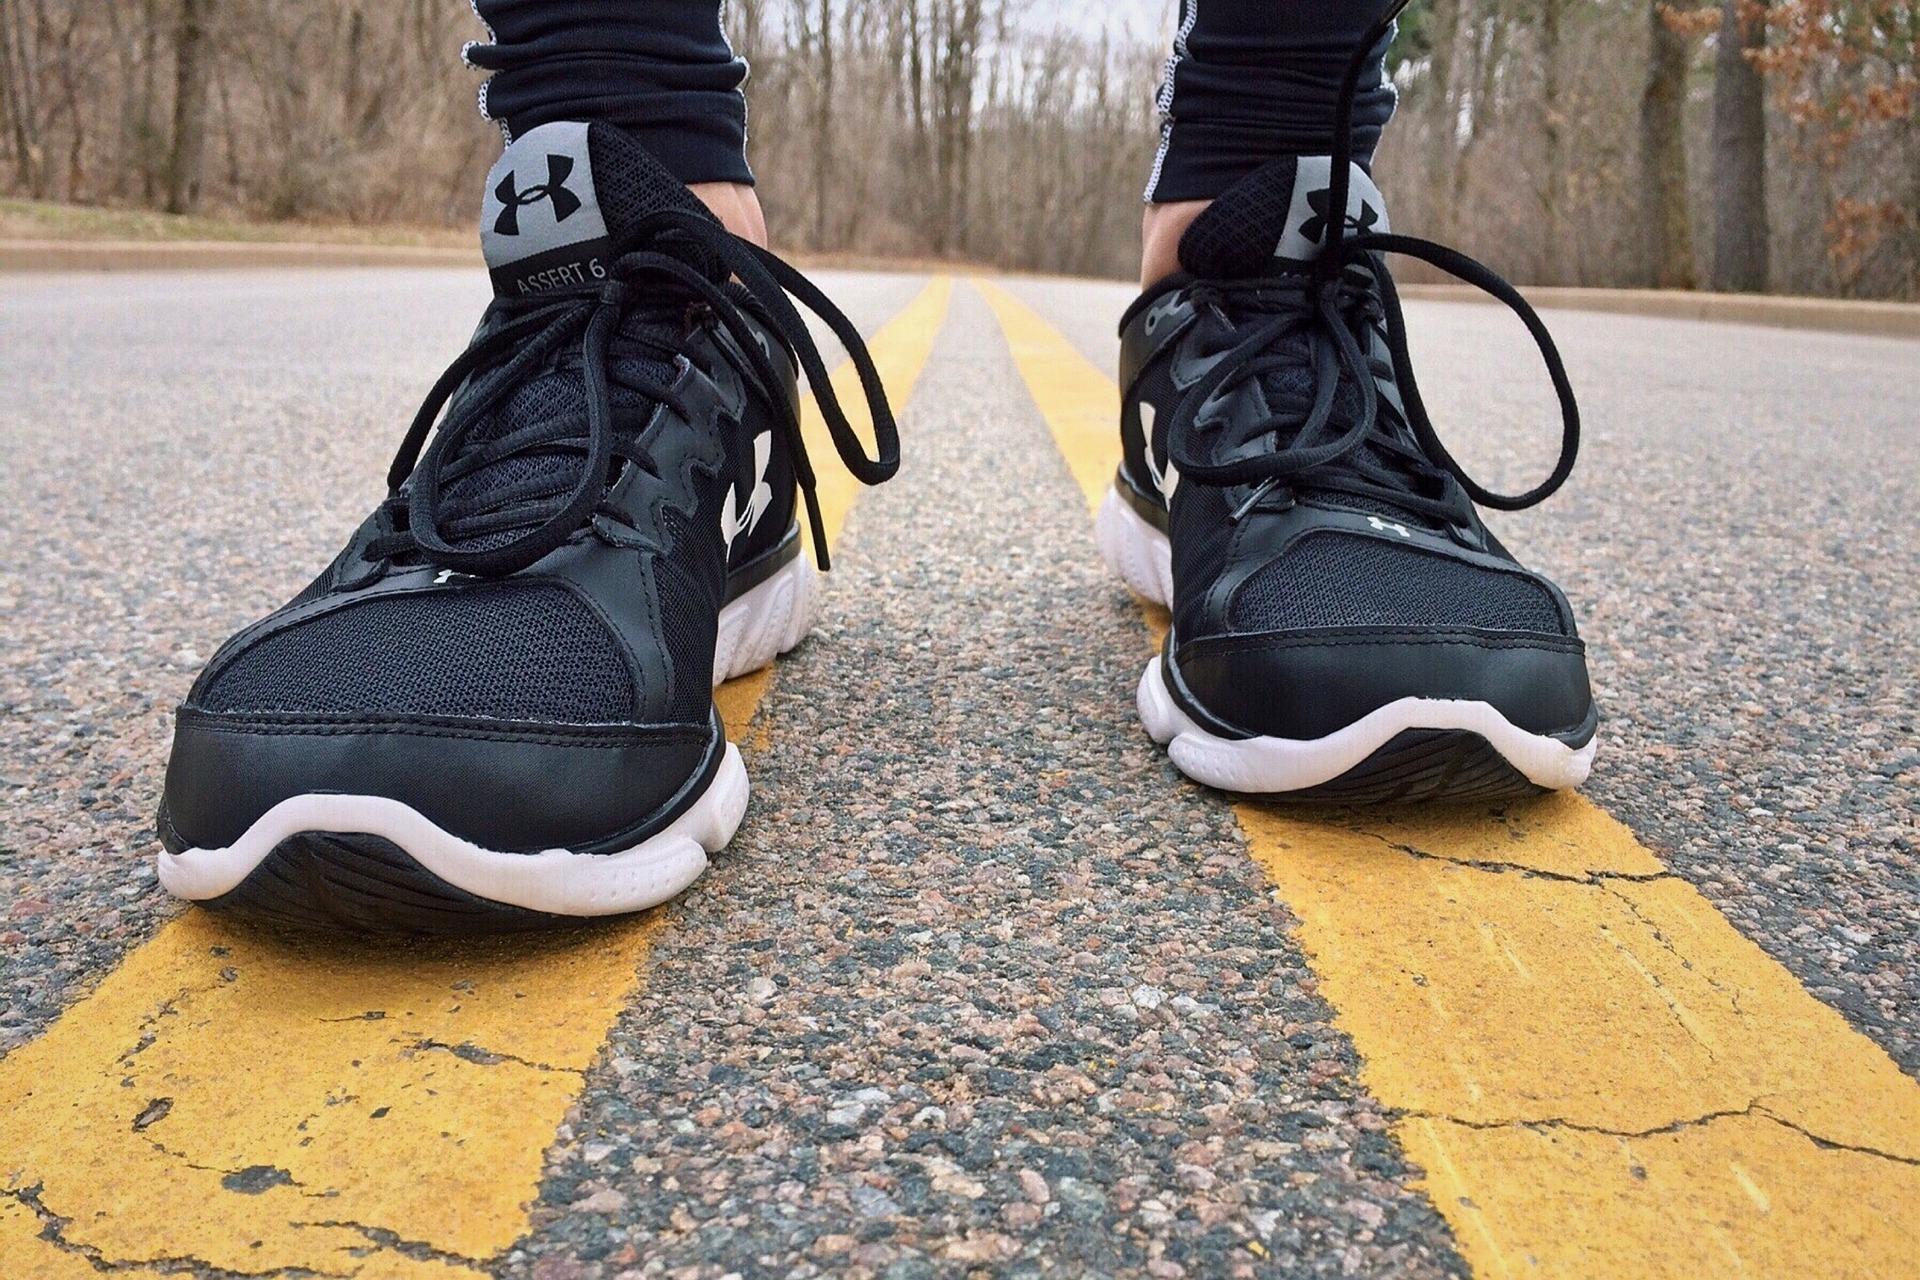 Image of a person wearing shoes on a road.